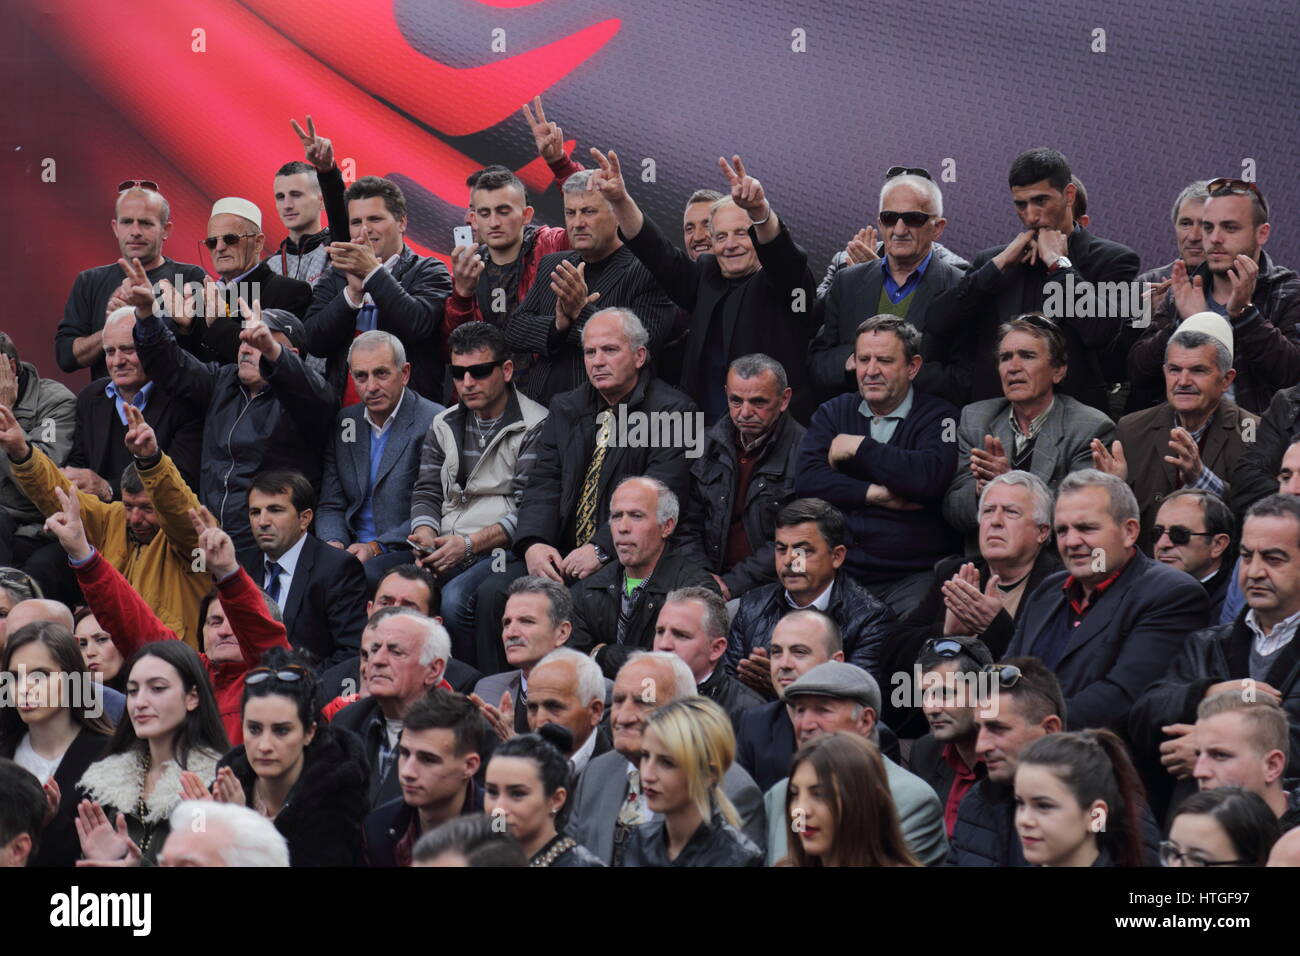 Tirana, Albania 11 March 2017. Political rally of Democratic Party of Albania in the course of election campaign 2017 in Albania: political supporters in the crowd Stock Photo